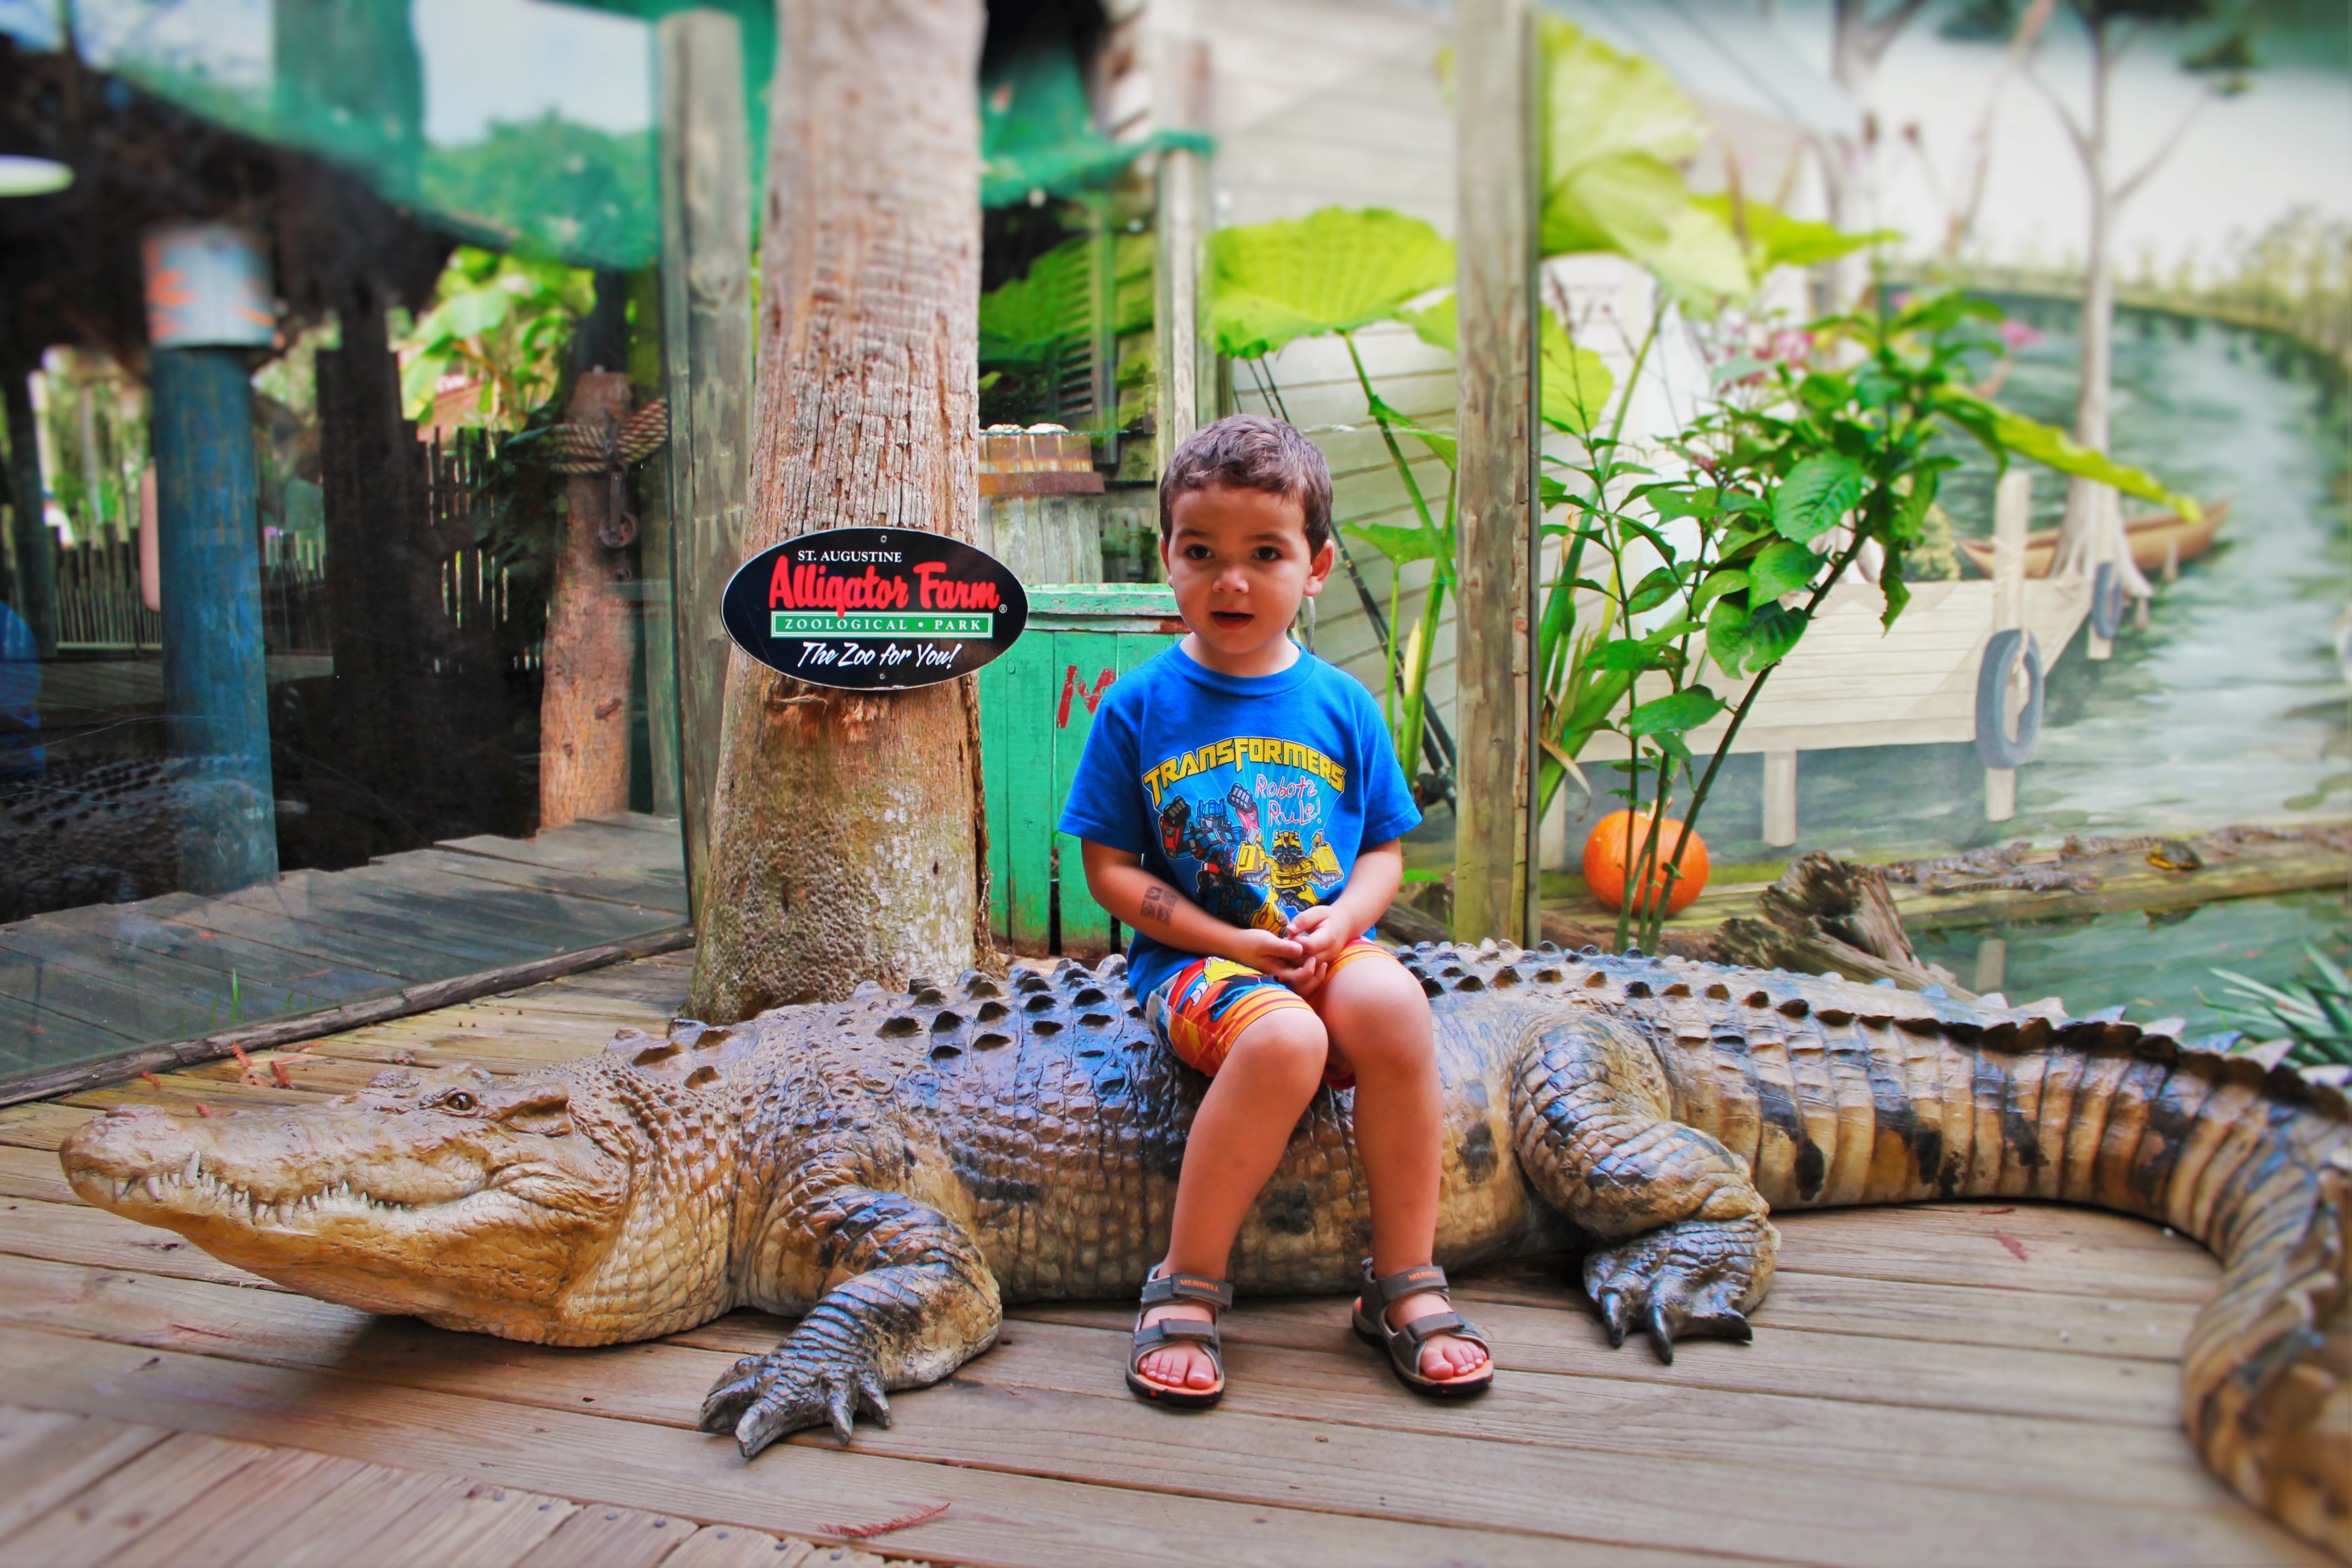 Complete Review of the Saint Augustine Alligator Farm (and tips for visiting!)